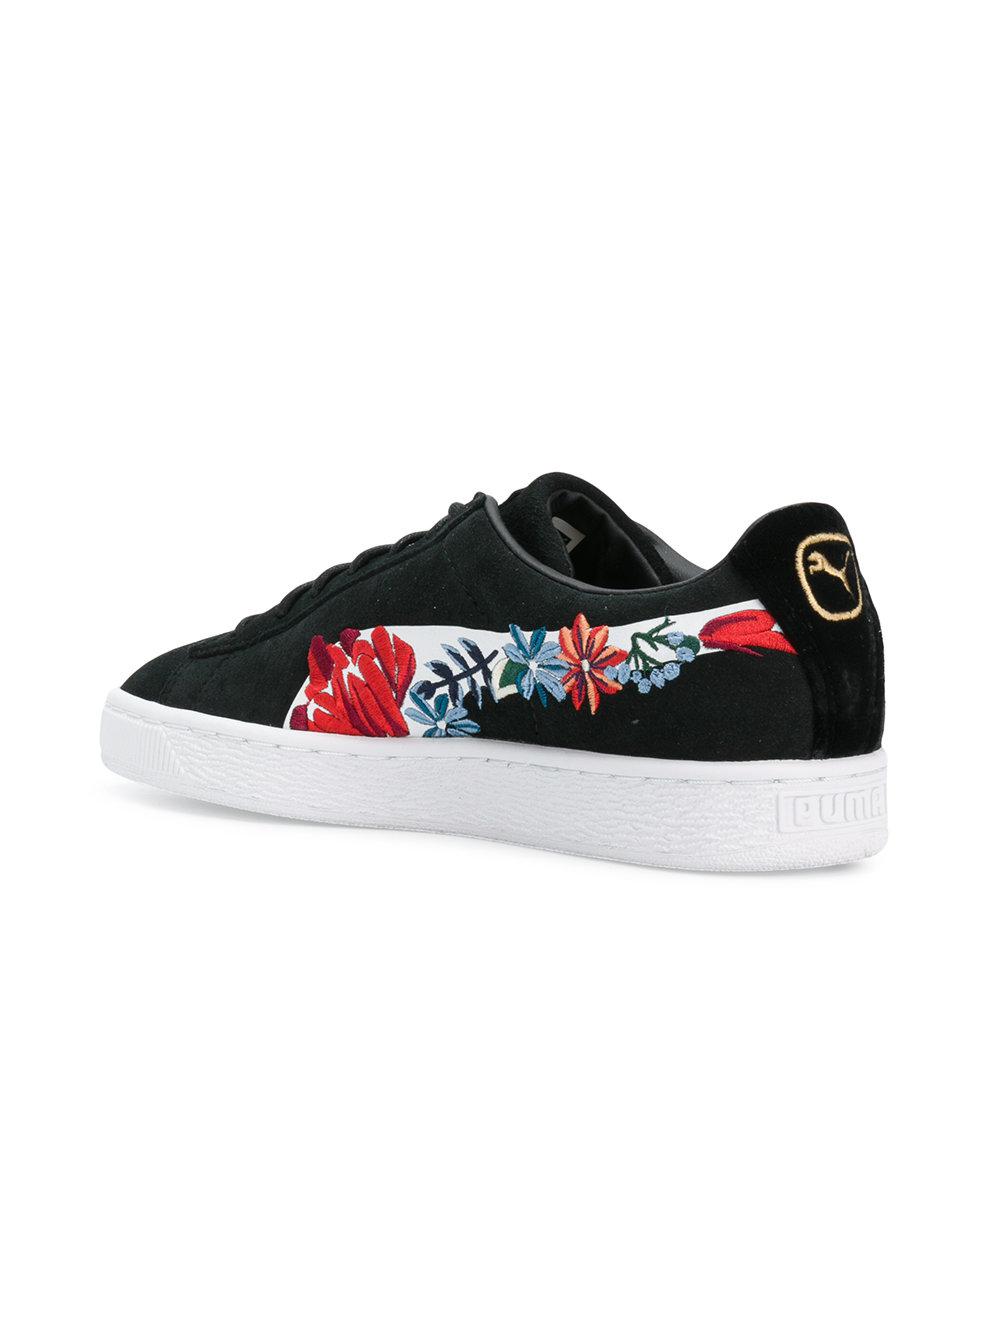 PUMA Suede Hyper Floral Embroidered Sneakers in Black - Lyst